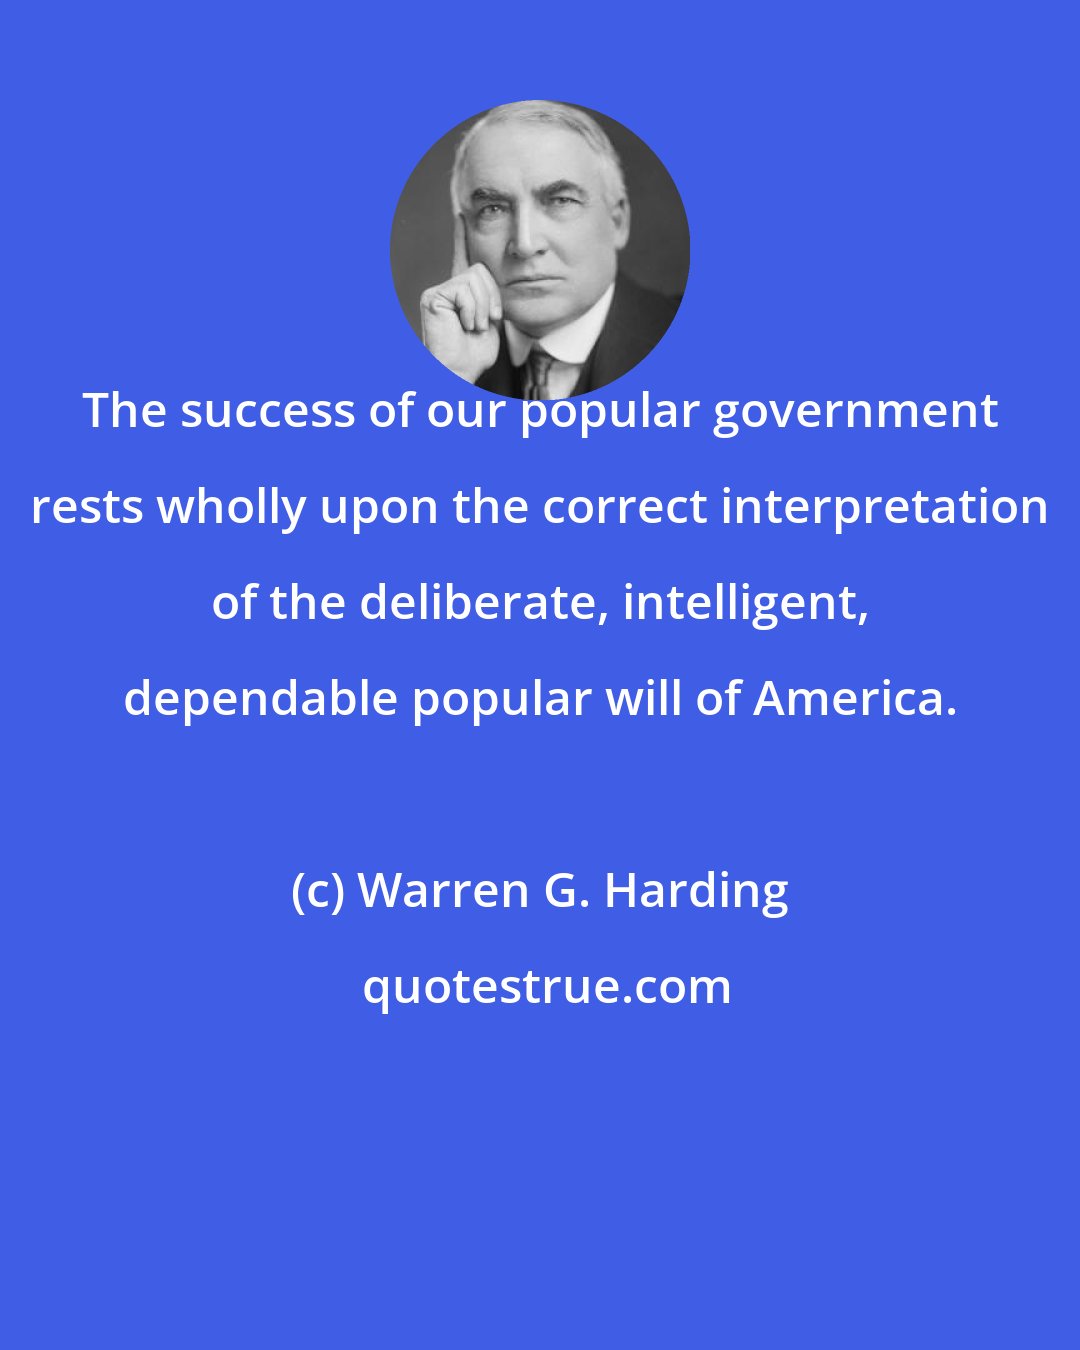 Warren G. Harding: The success of our popular government rests wholly upon the correct interpretation of the deliberate, intelligent, dependable popular will of America.